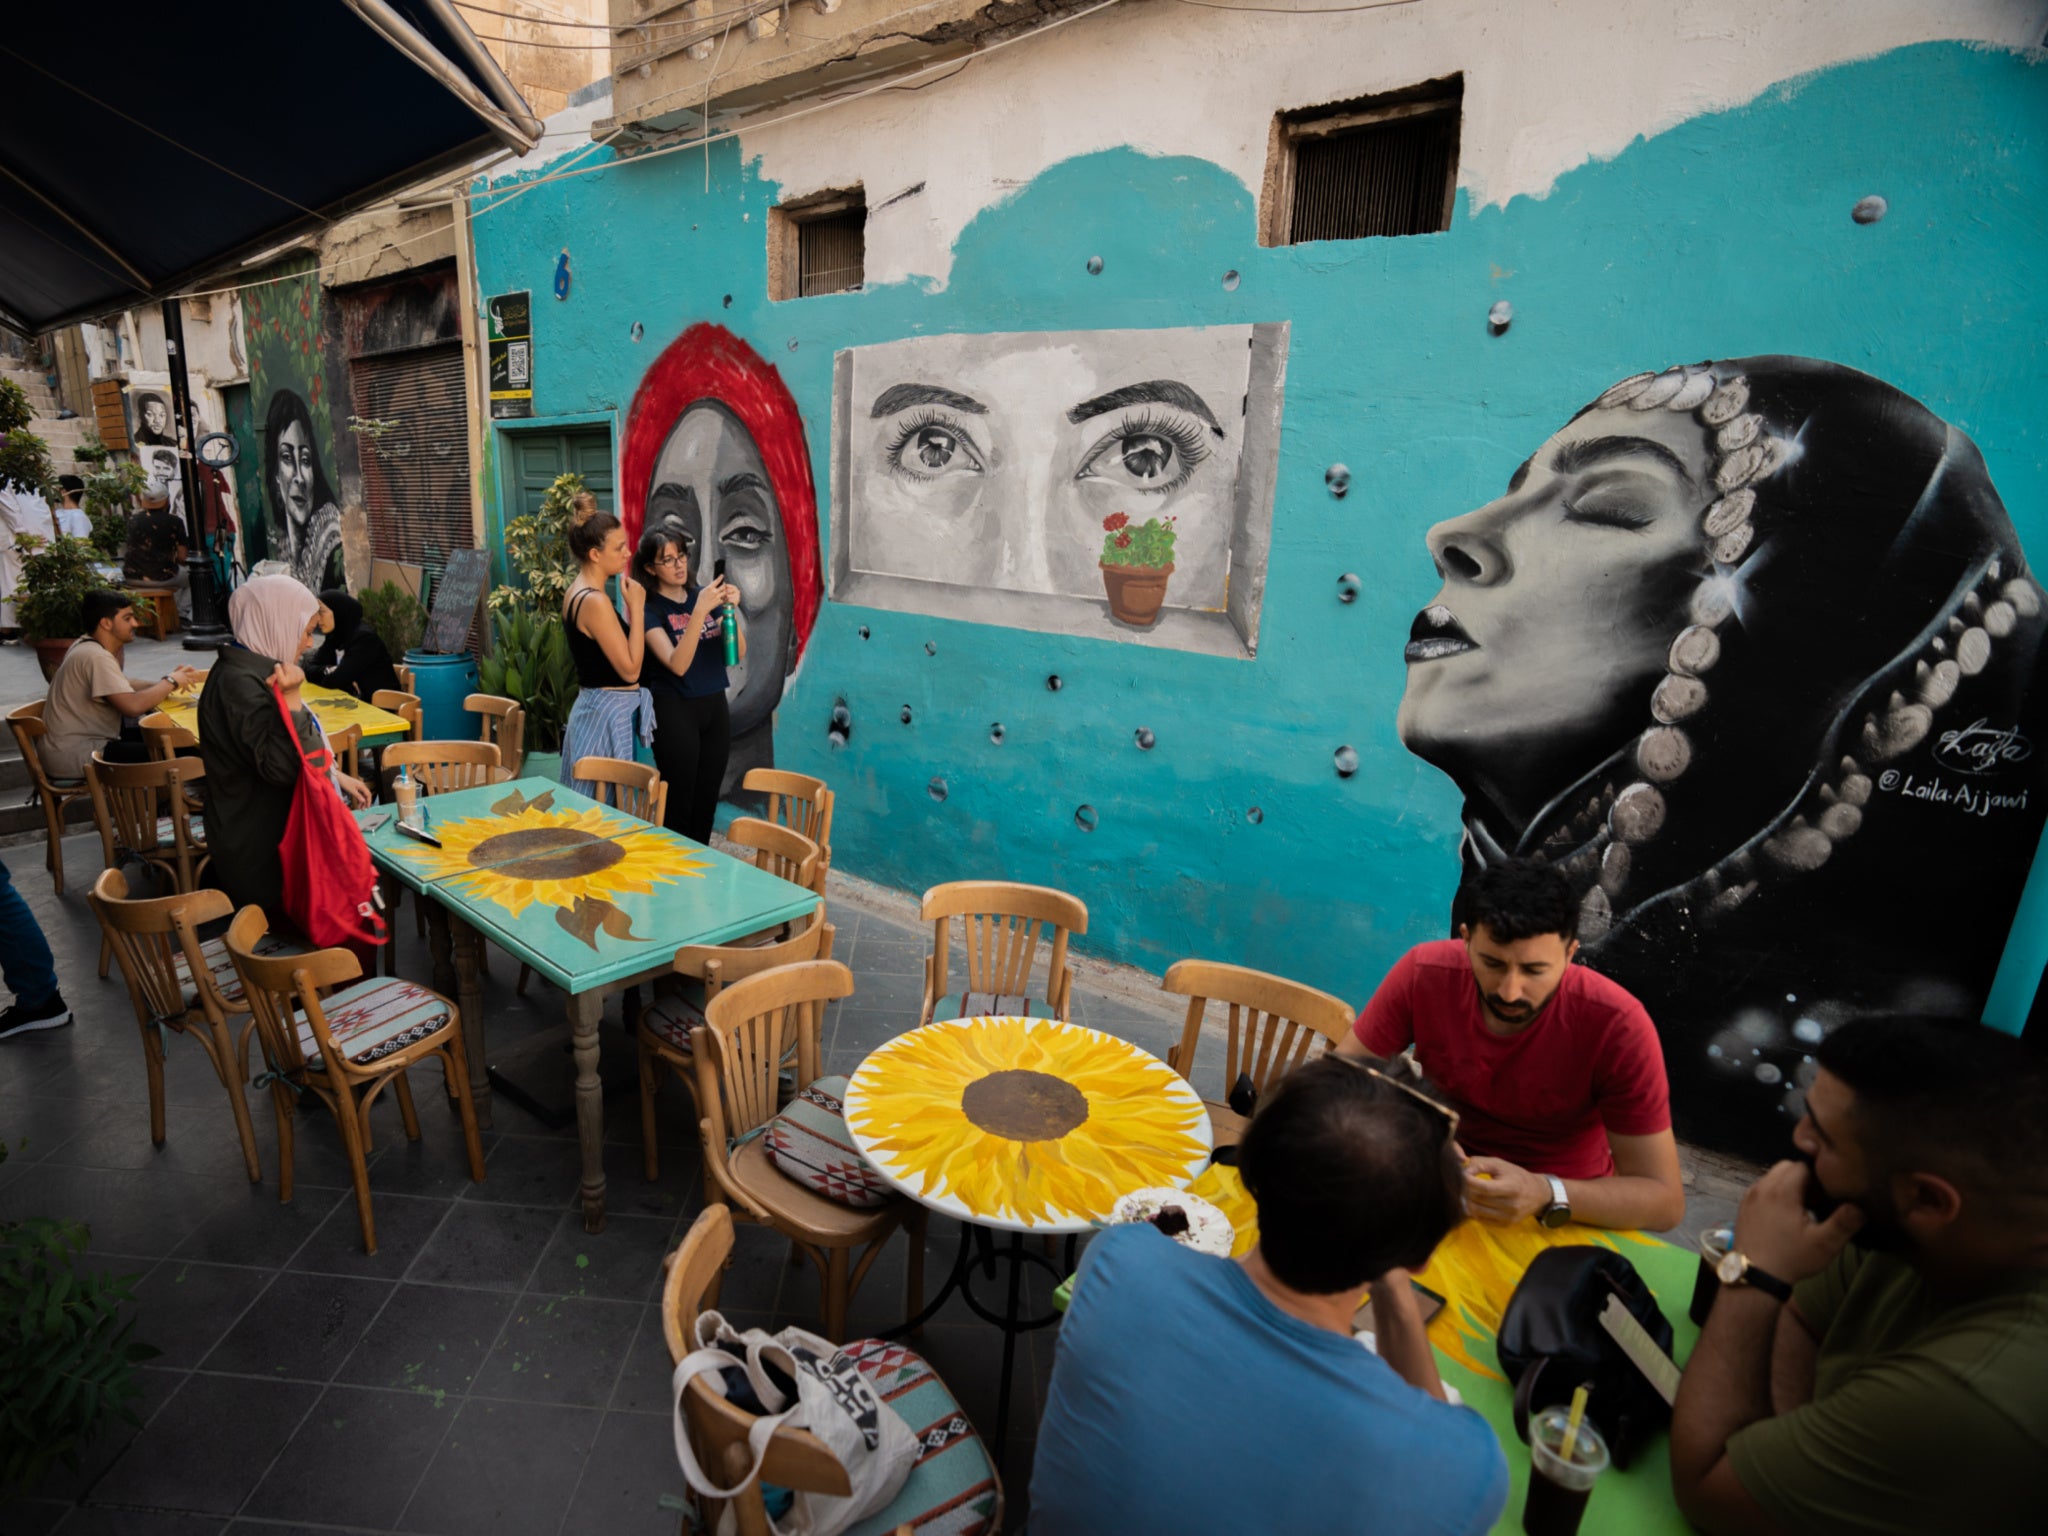 Around 70 per cent of street art in Amman is created by female artists